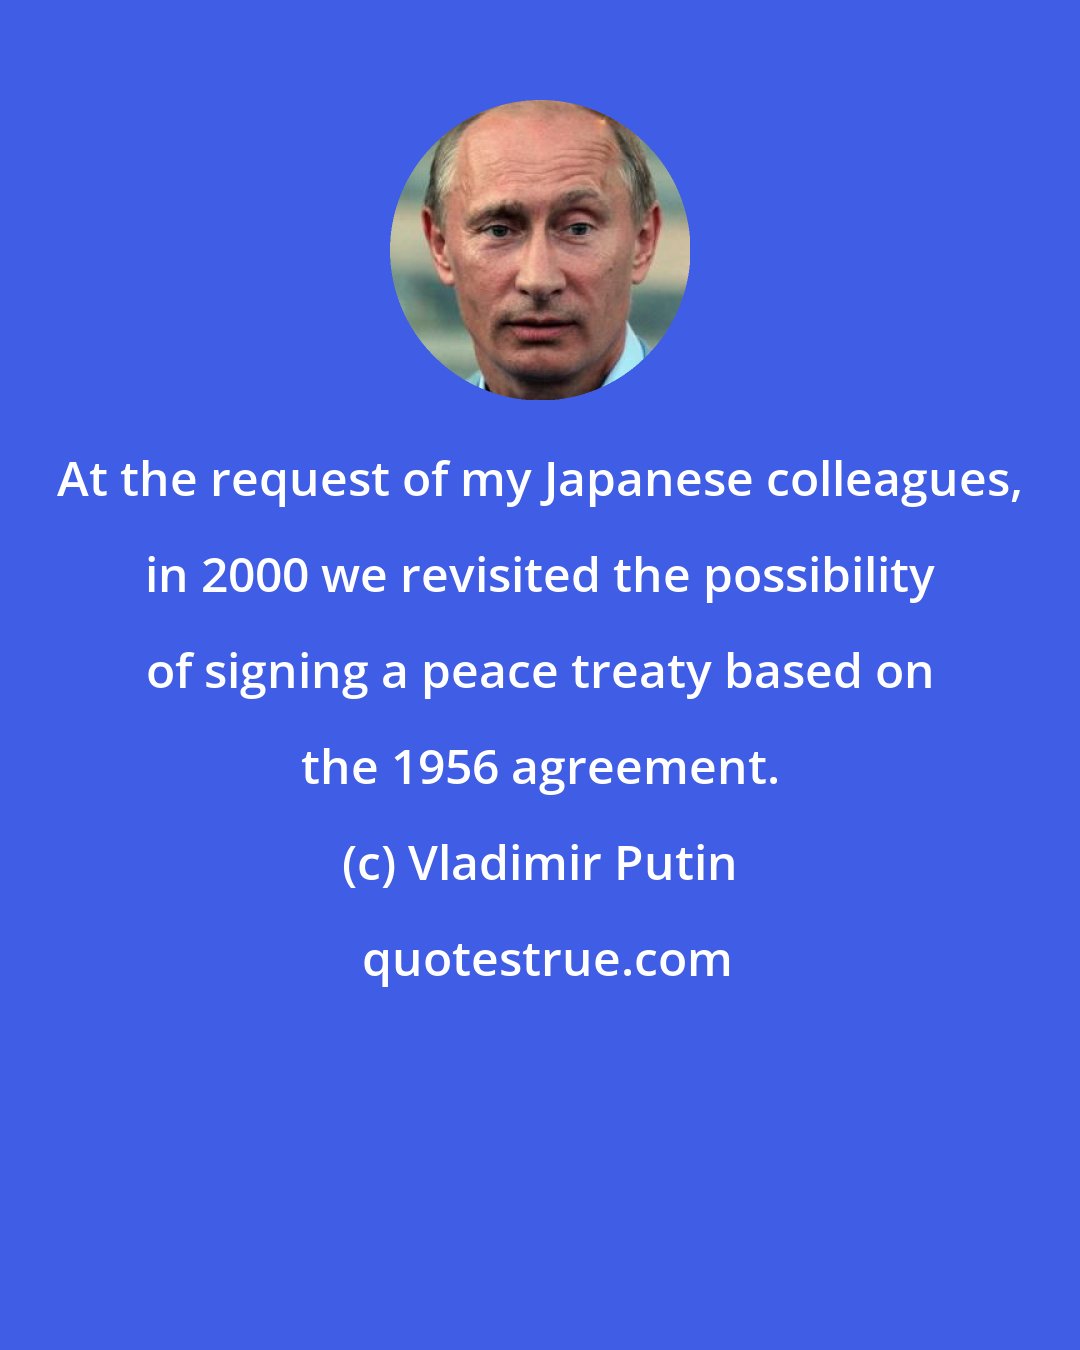 Vladimir Putin: At the request of my Japanese colleagues, in 2000 we revisited the possibility of signing a peace treaty based on the 1956 agreement.